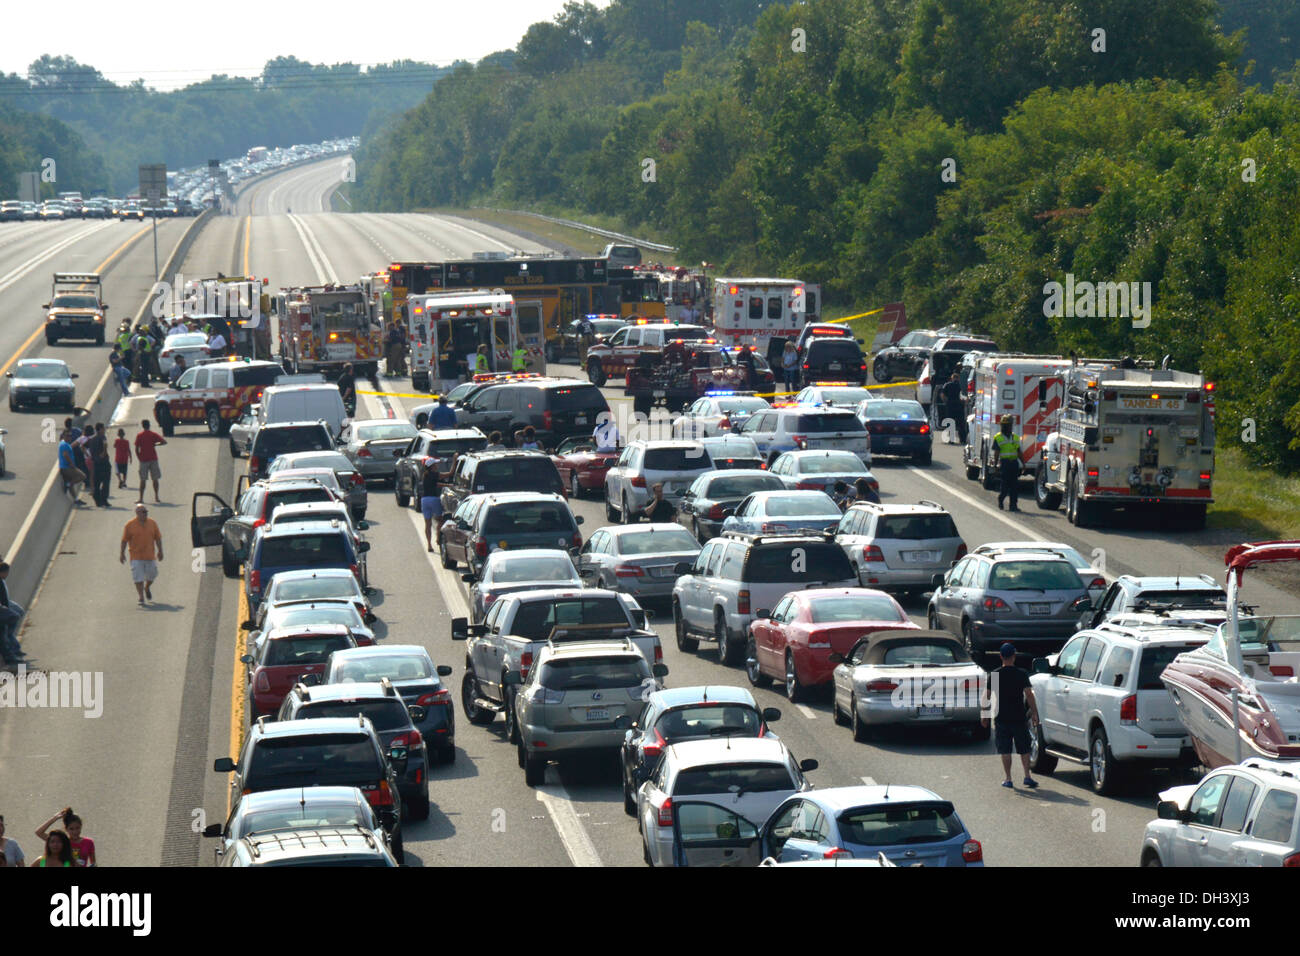 Traffic gridlock after crash on a highway in Bowie,Md Stock Photo